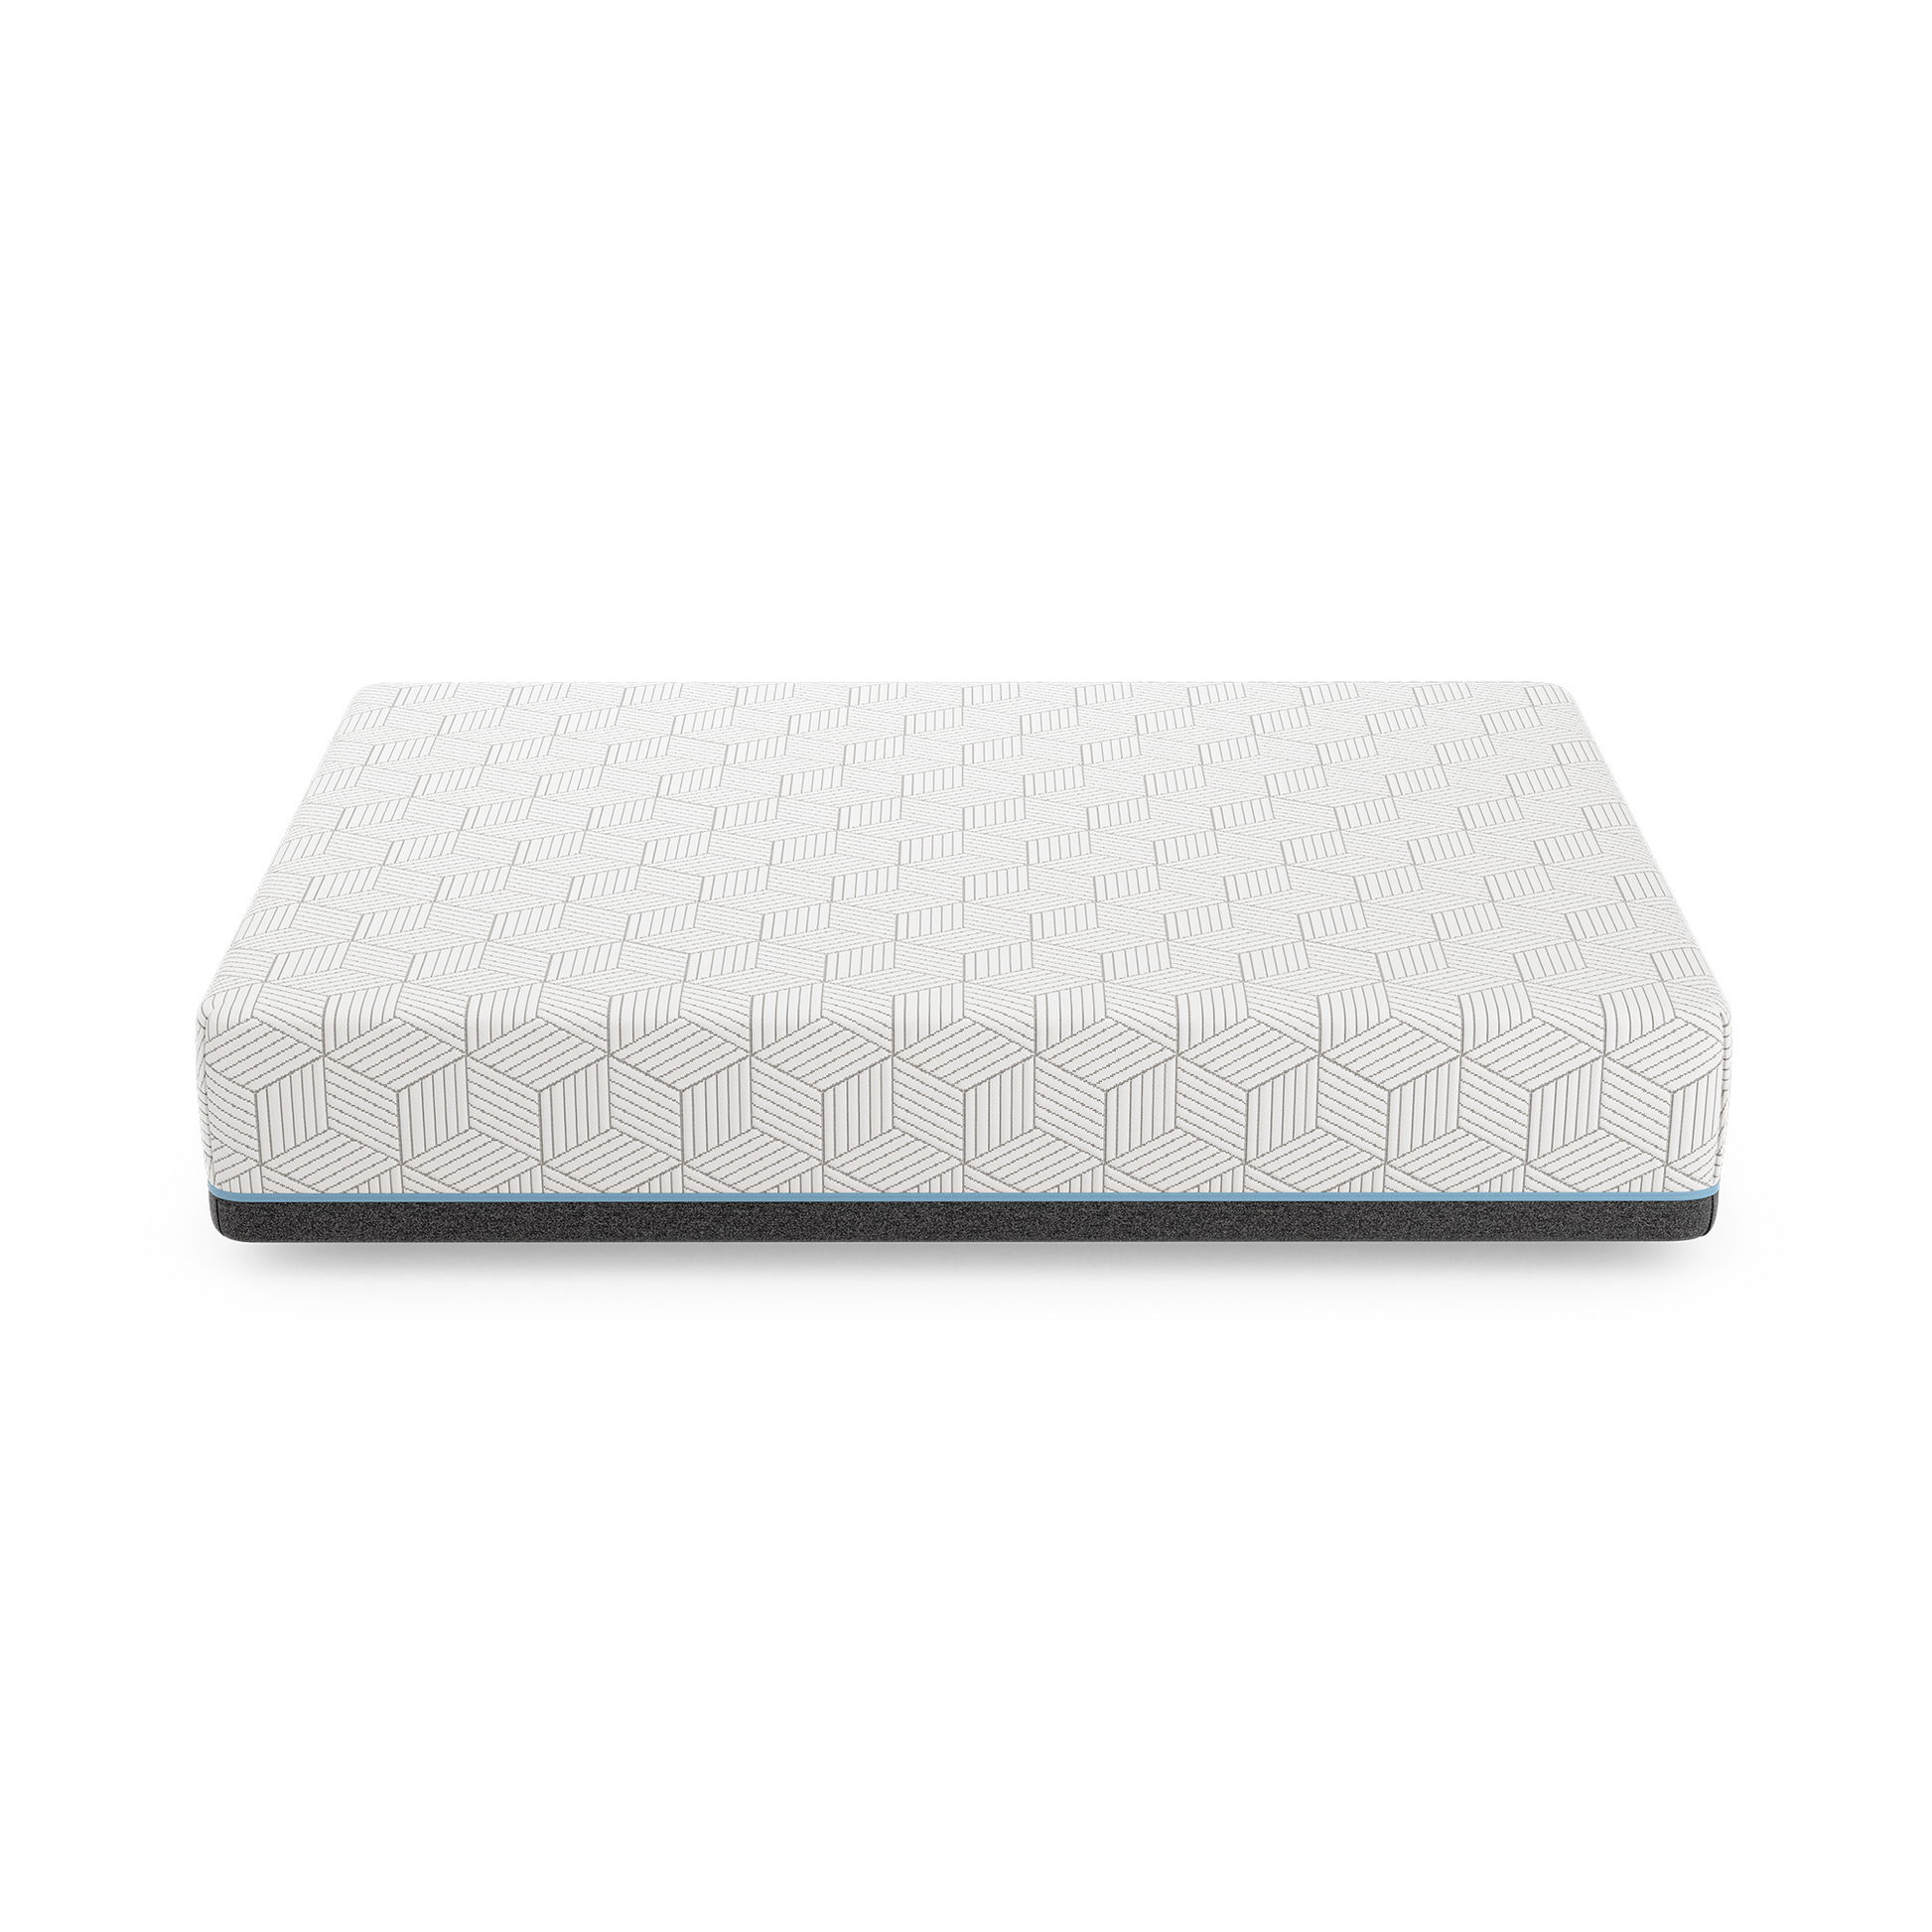 Harmony Chill 3.0 13" Memory Foam Mattress With Advanced Temperature Regulation, Side View